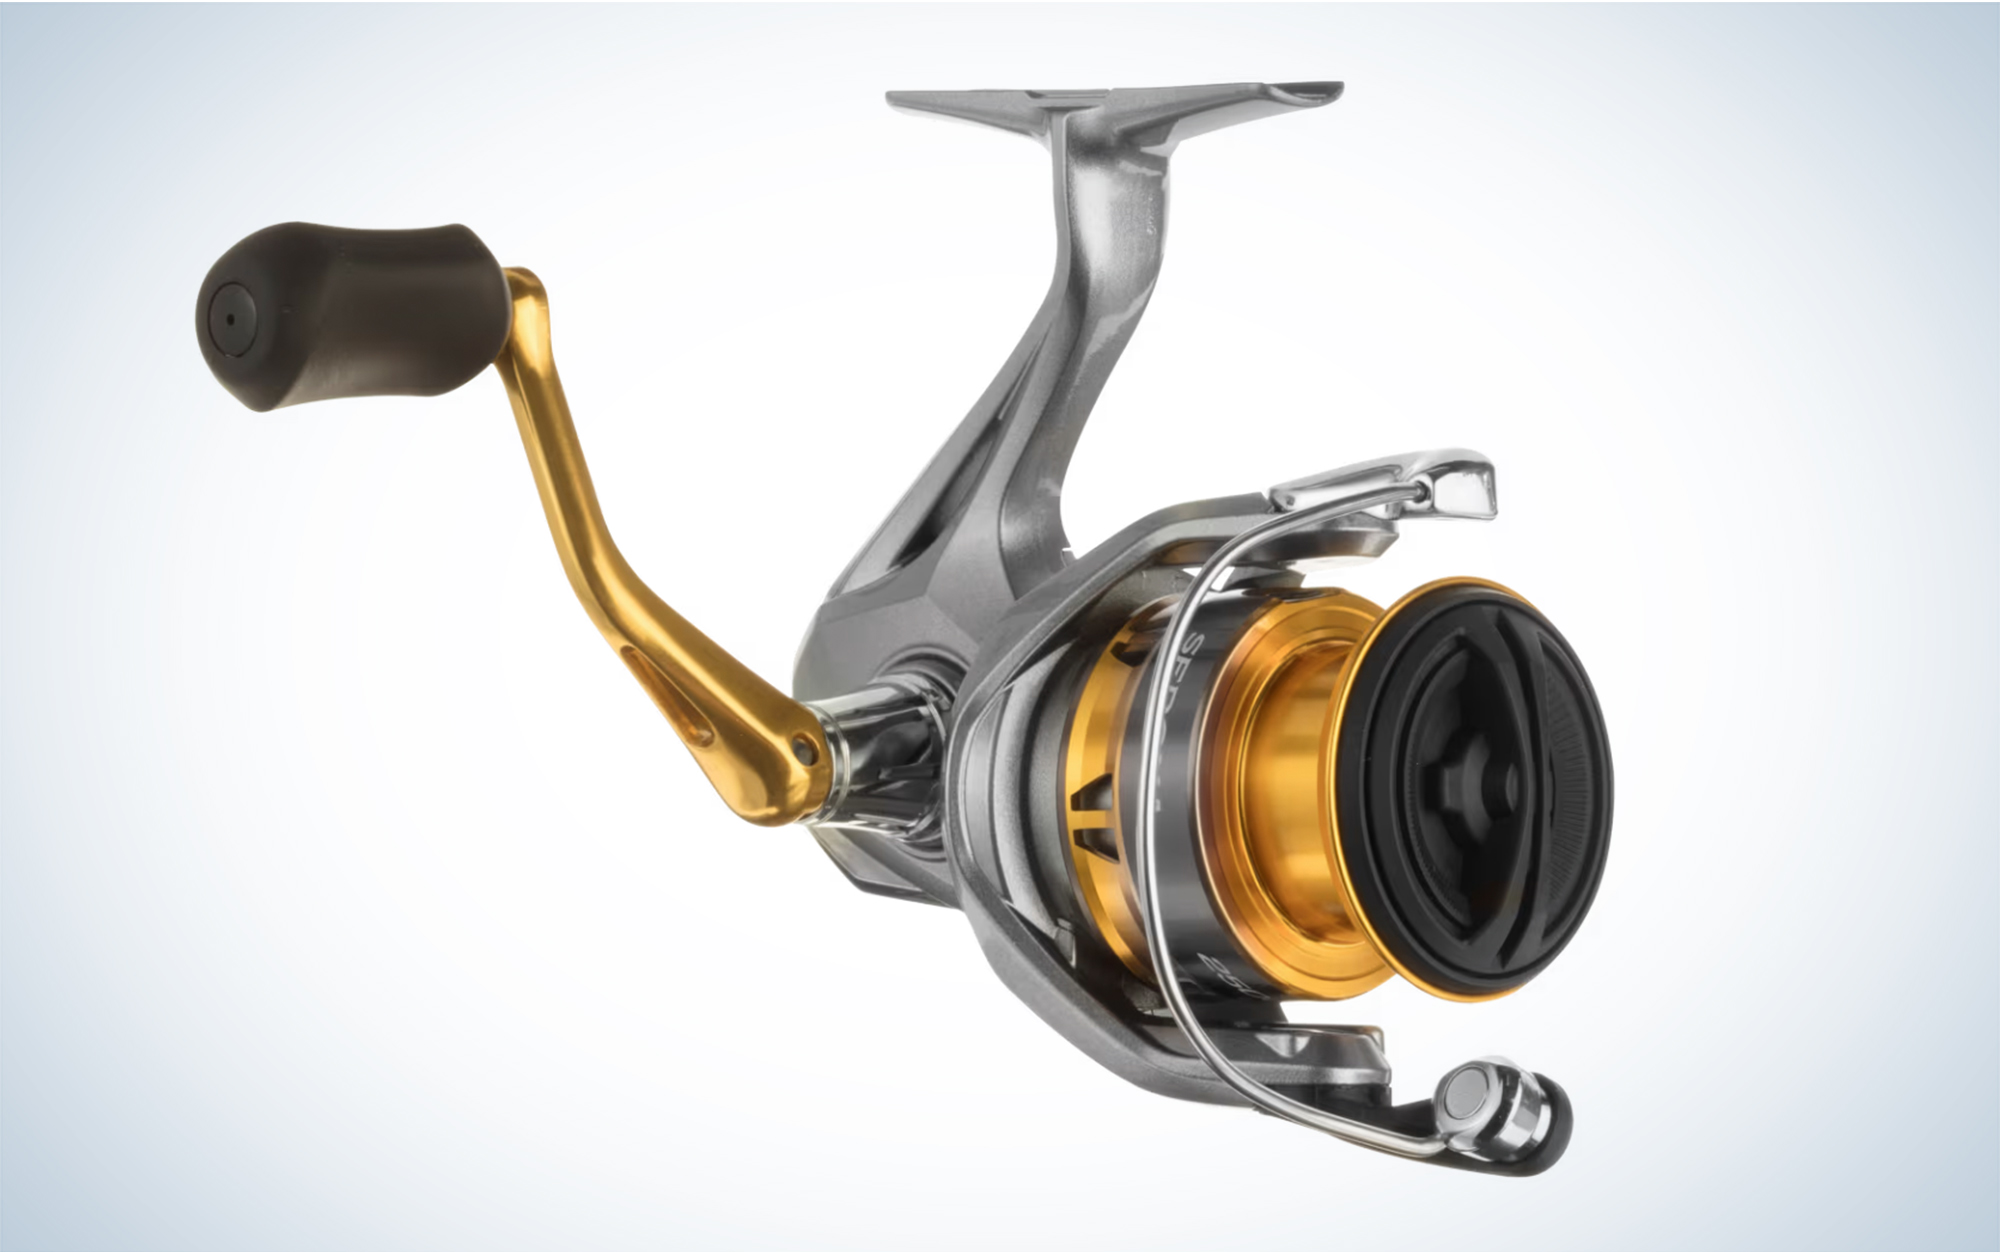 The 8 Best Ice Fishing Reels of 2023